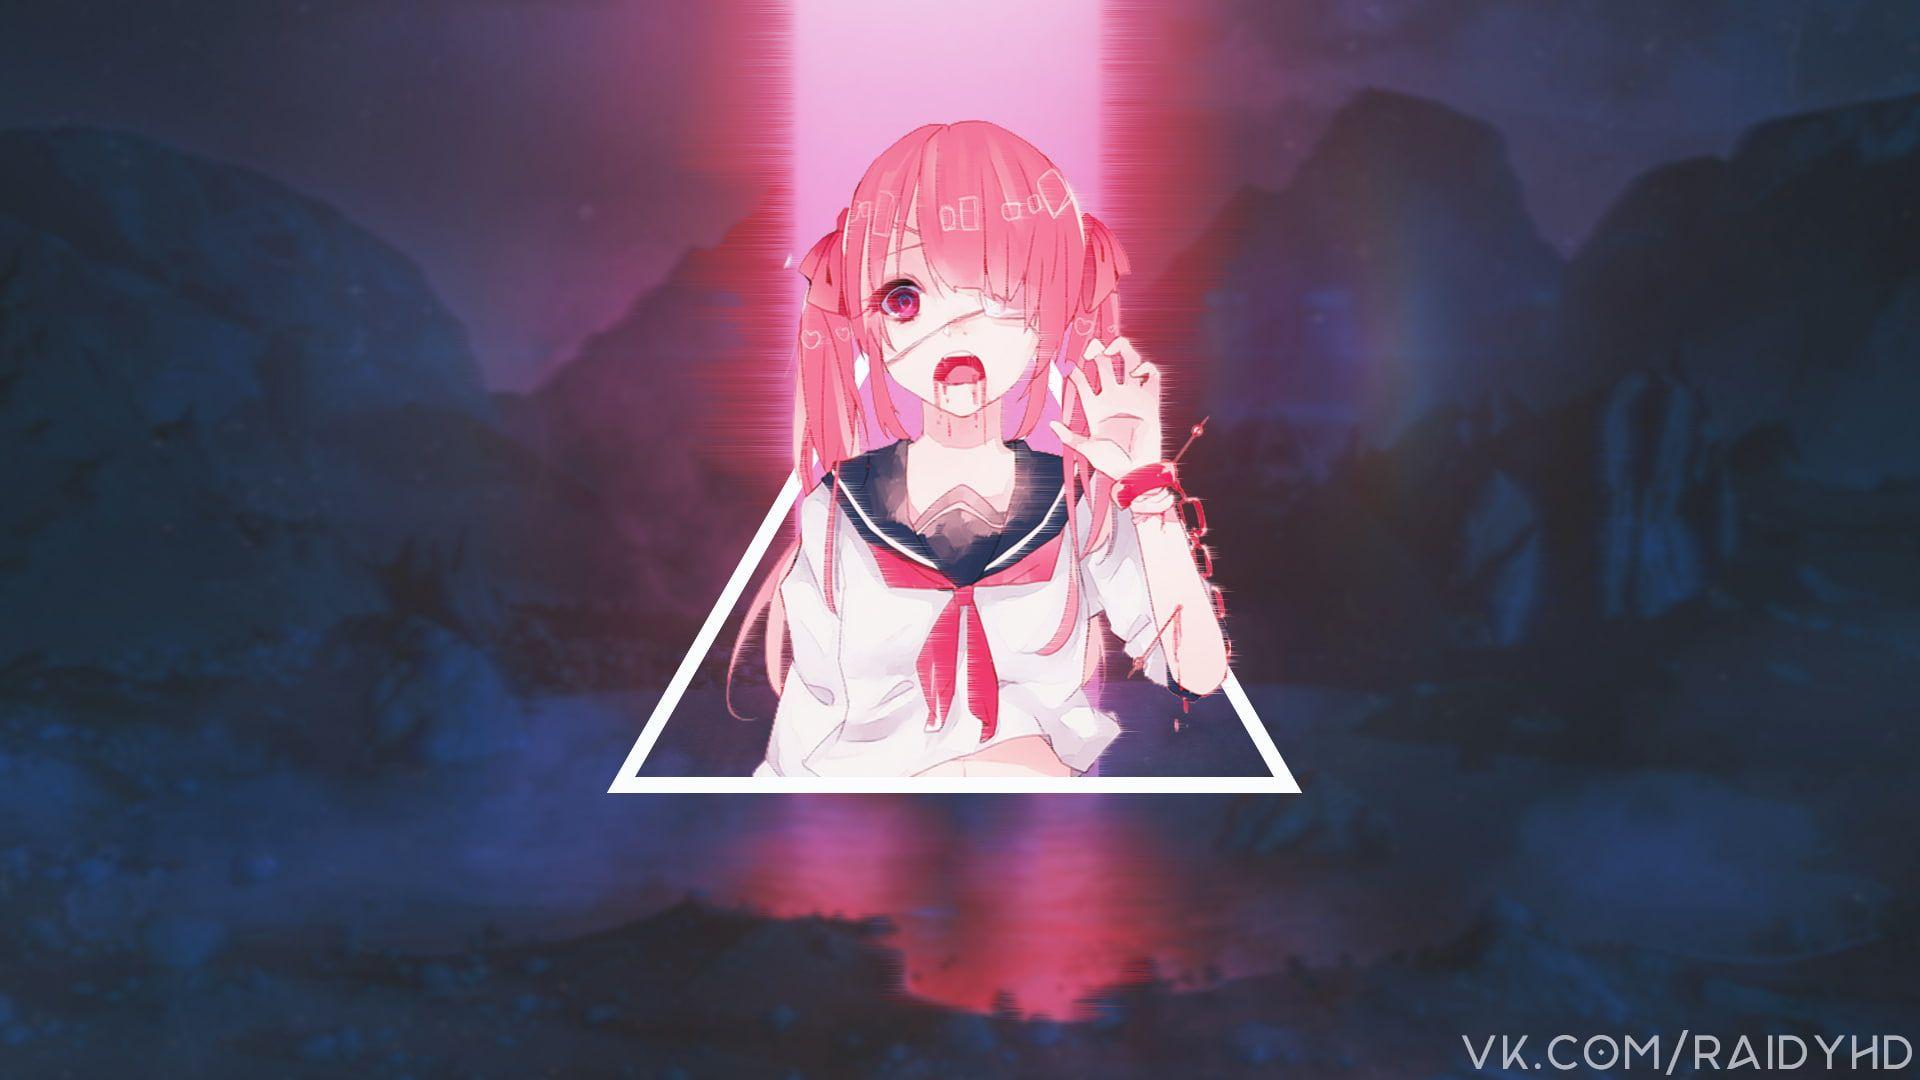 Wallpaper ID: 100285 / glitch art, anime girls, picture-in-picture, piture  in picture, loli free download